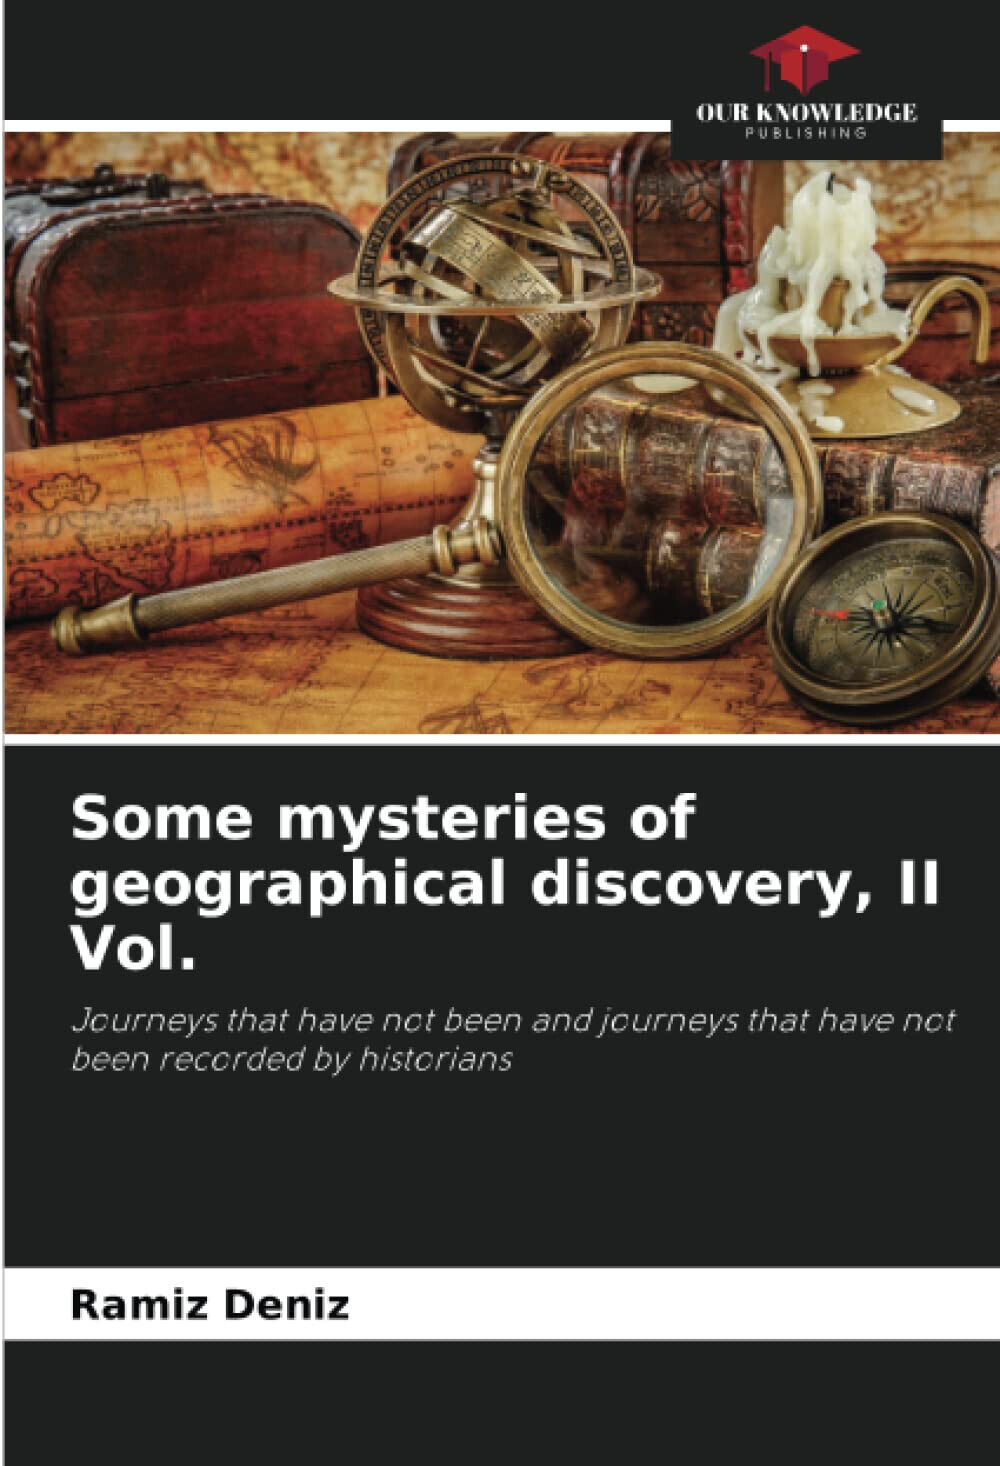 Some mysteries of geographical discovery, II Vol. - Ram?z Den?z - 2022